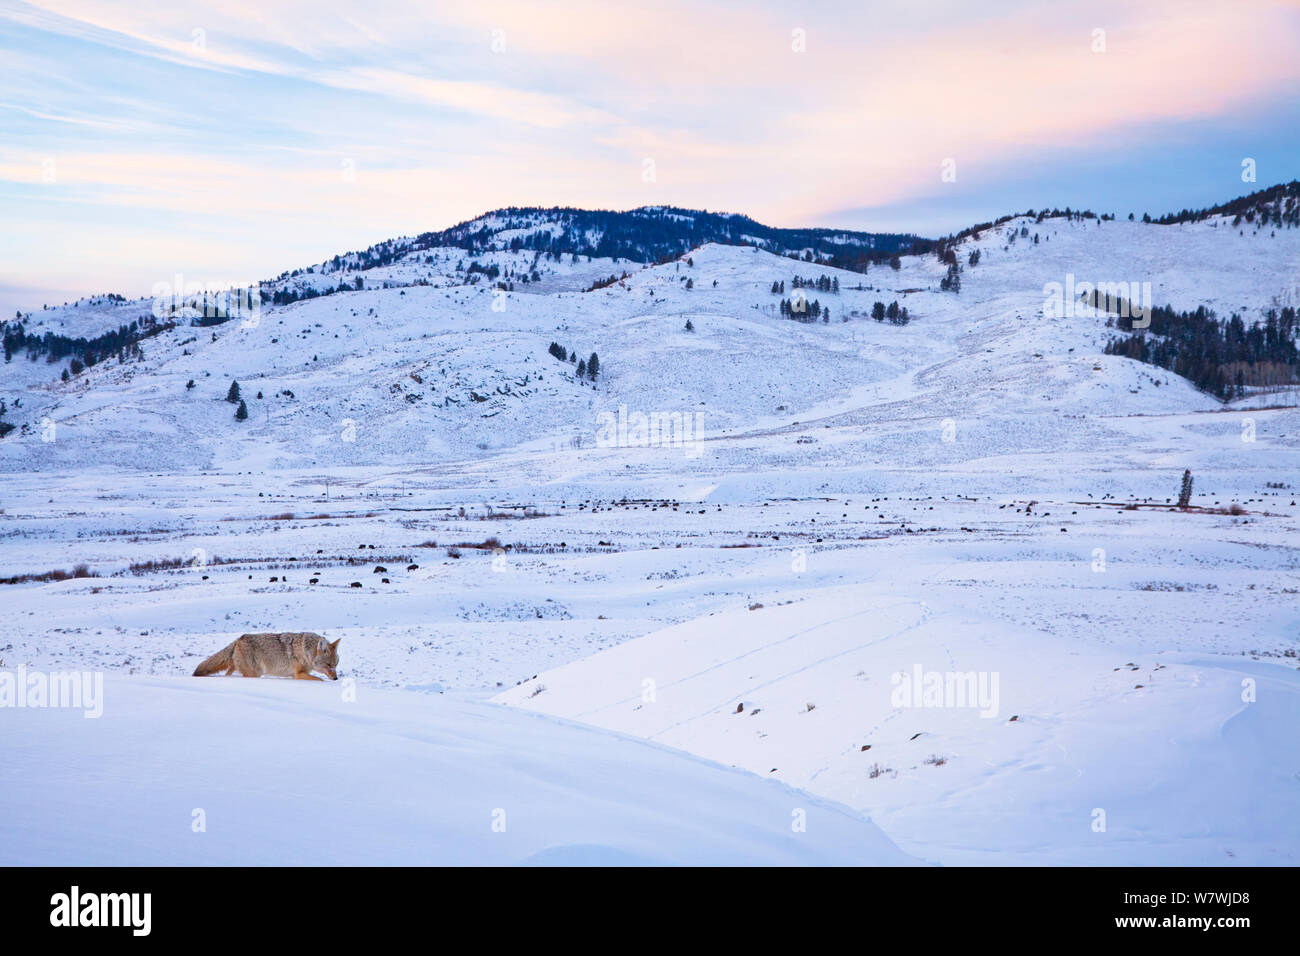 A coyote (Canis latrans) hunting in the snow, Lamar Valley, Yellowstone National Park, Wyoming, USA. December. Stock Photo